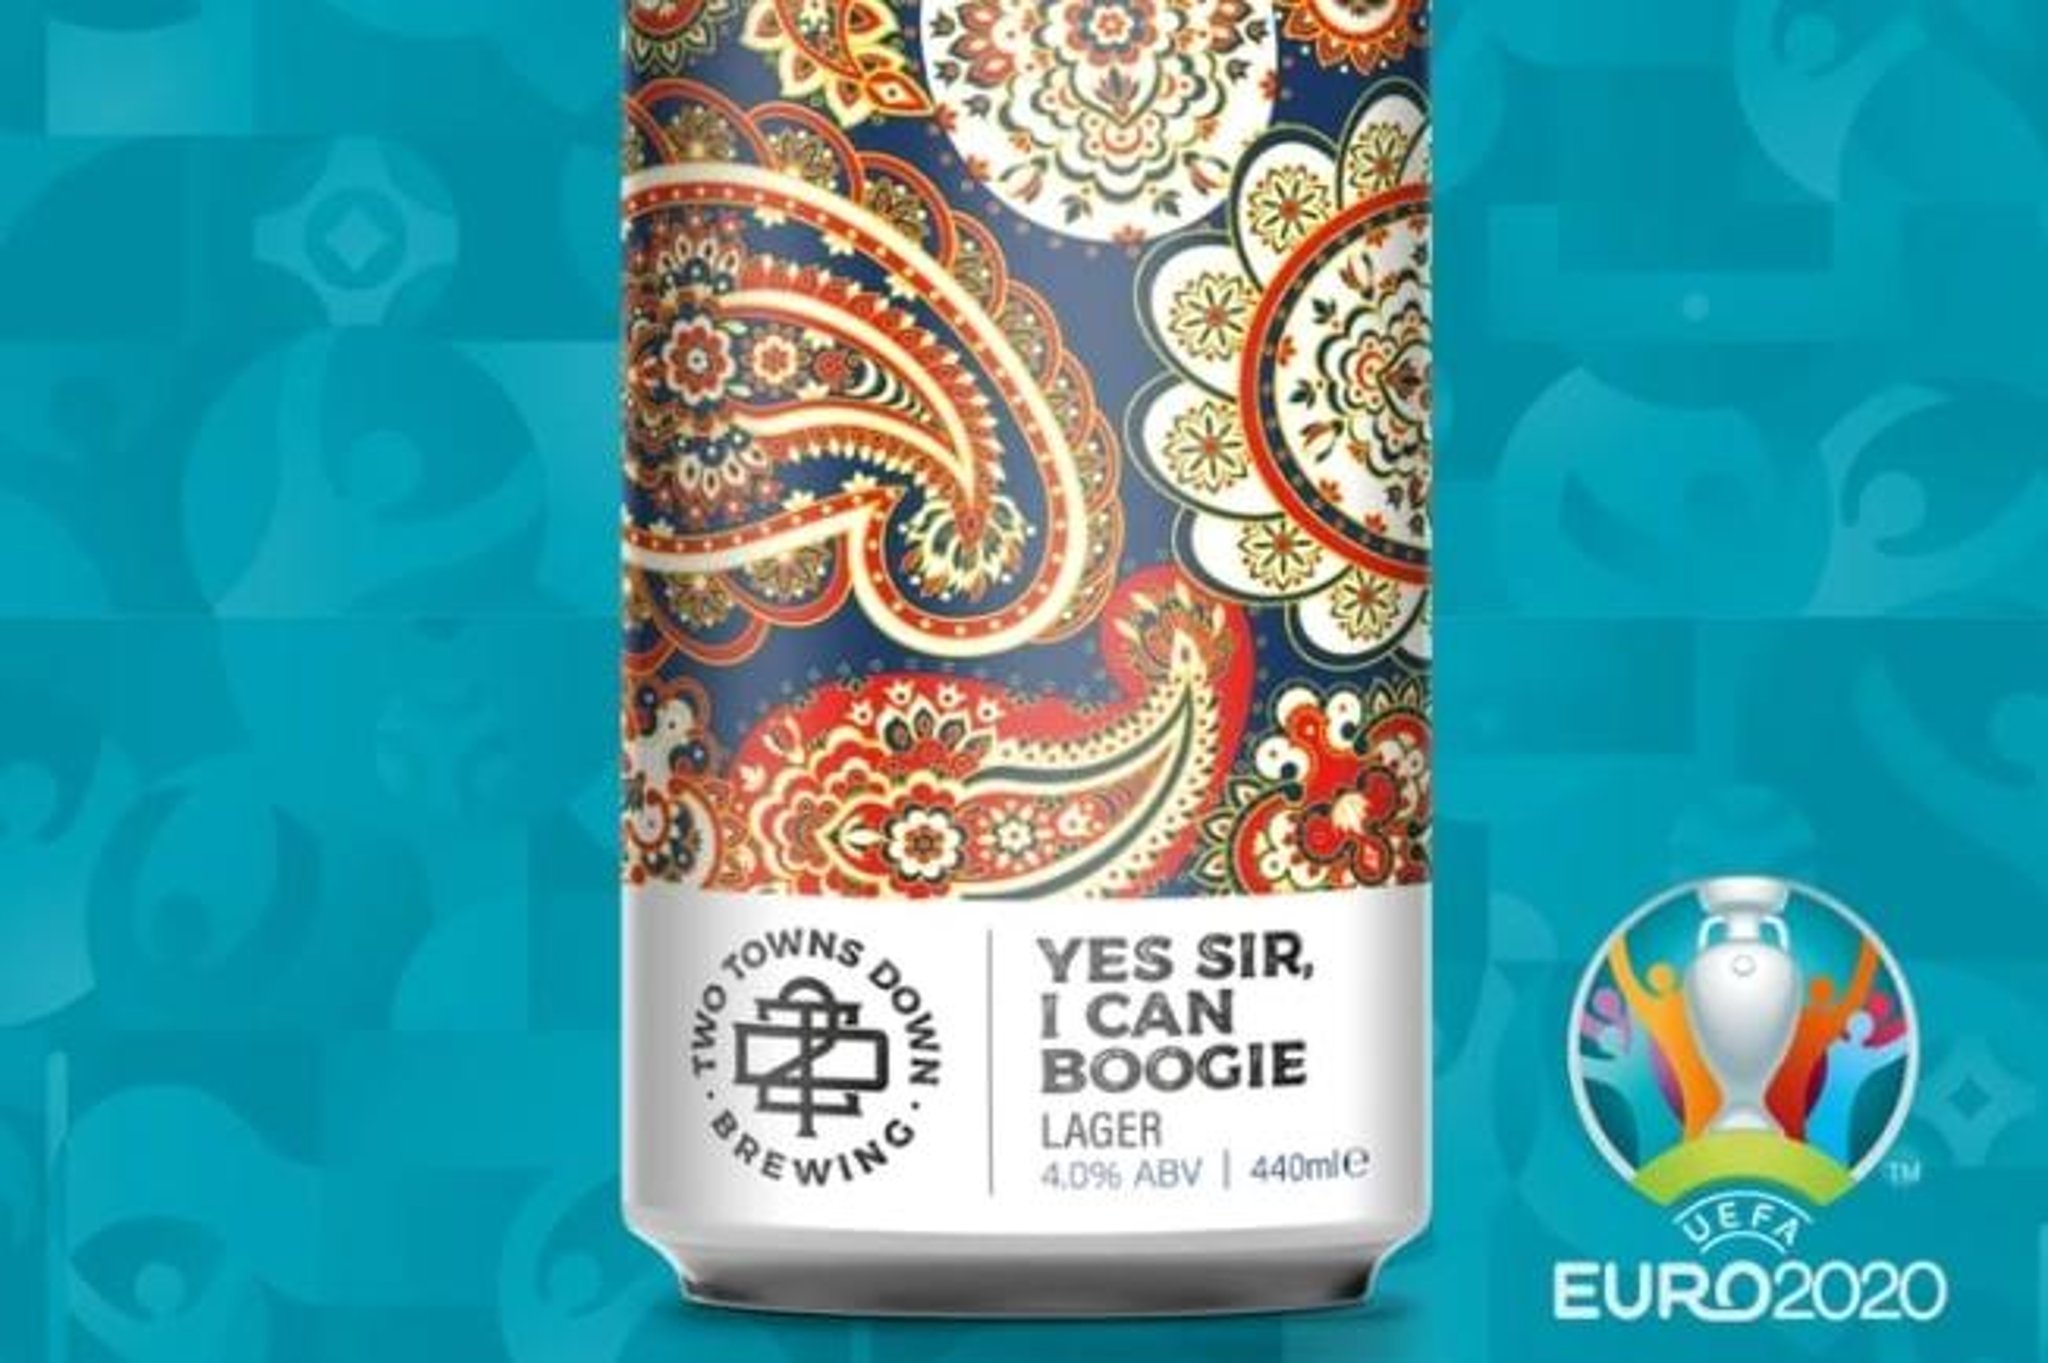 'Yes Sir, I can boogie': Scottish brewers launch special beer to celebrate Euro 2020